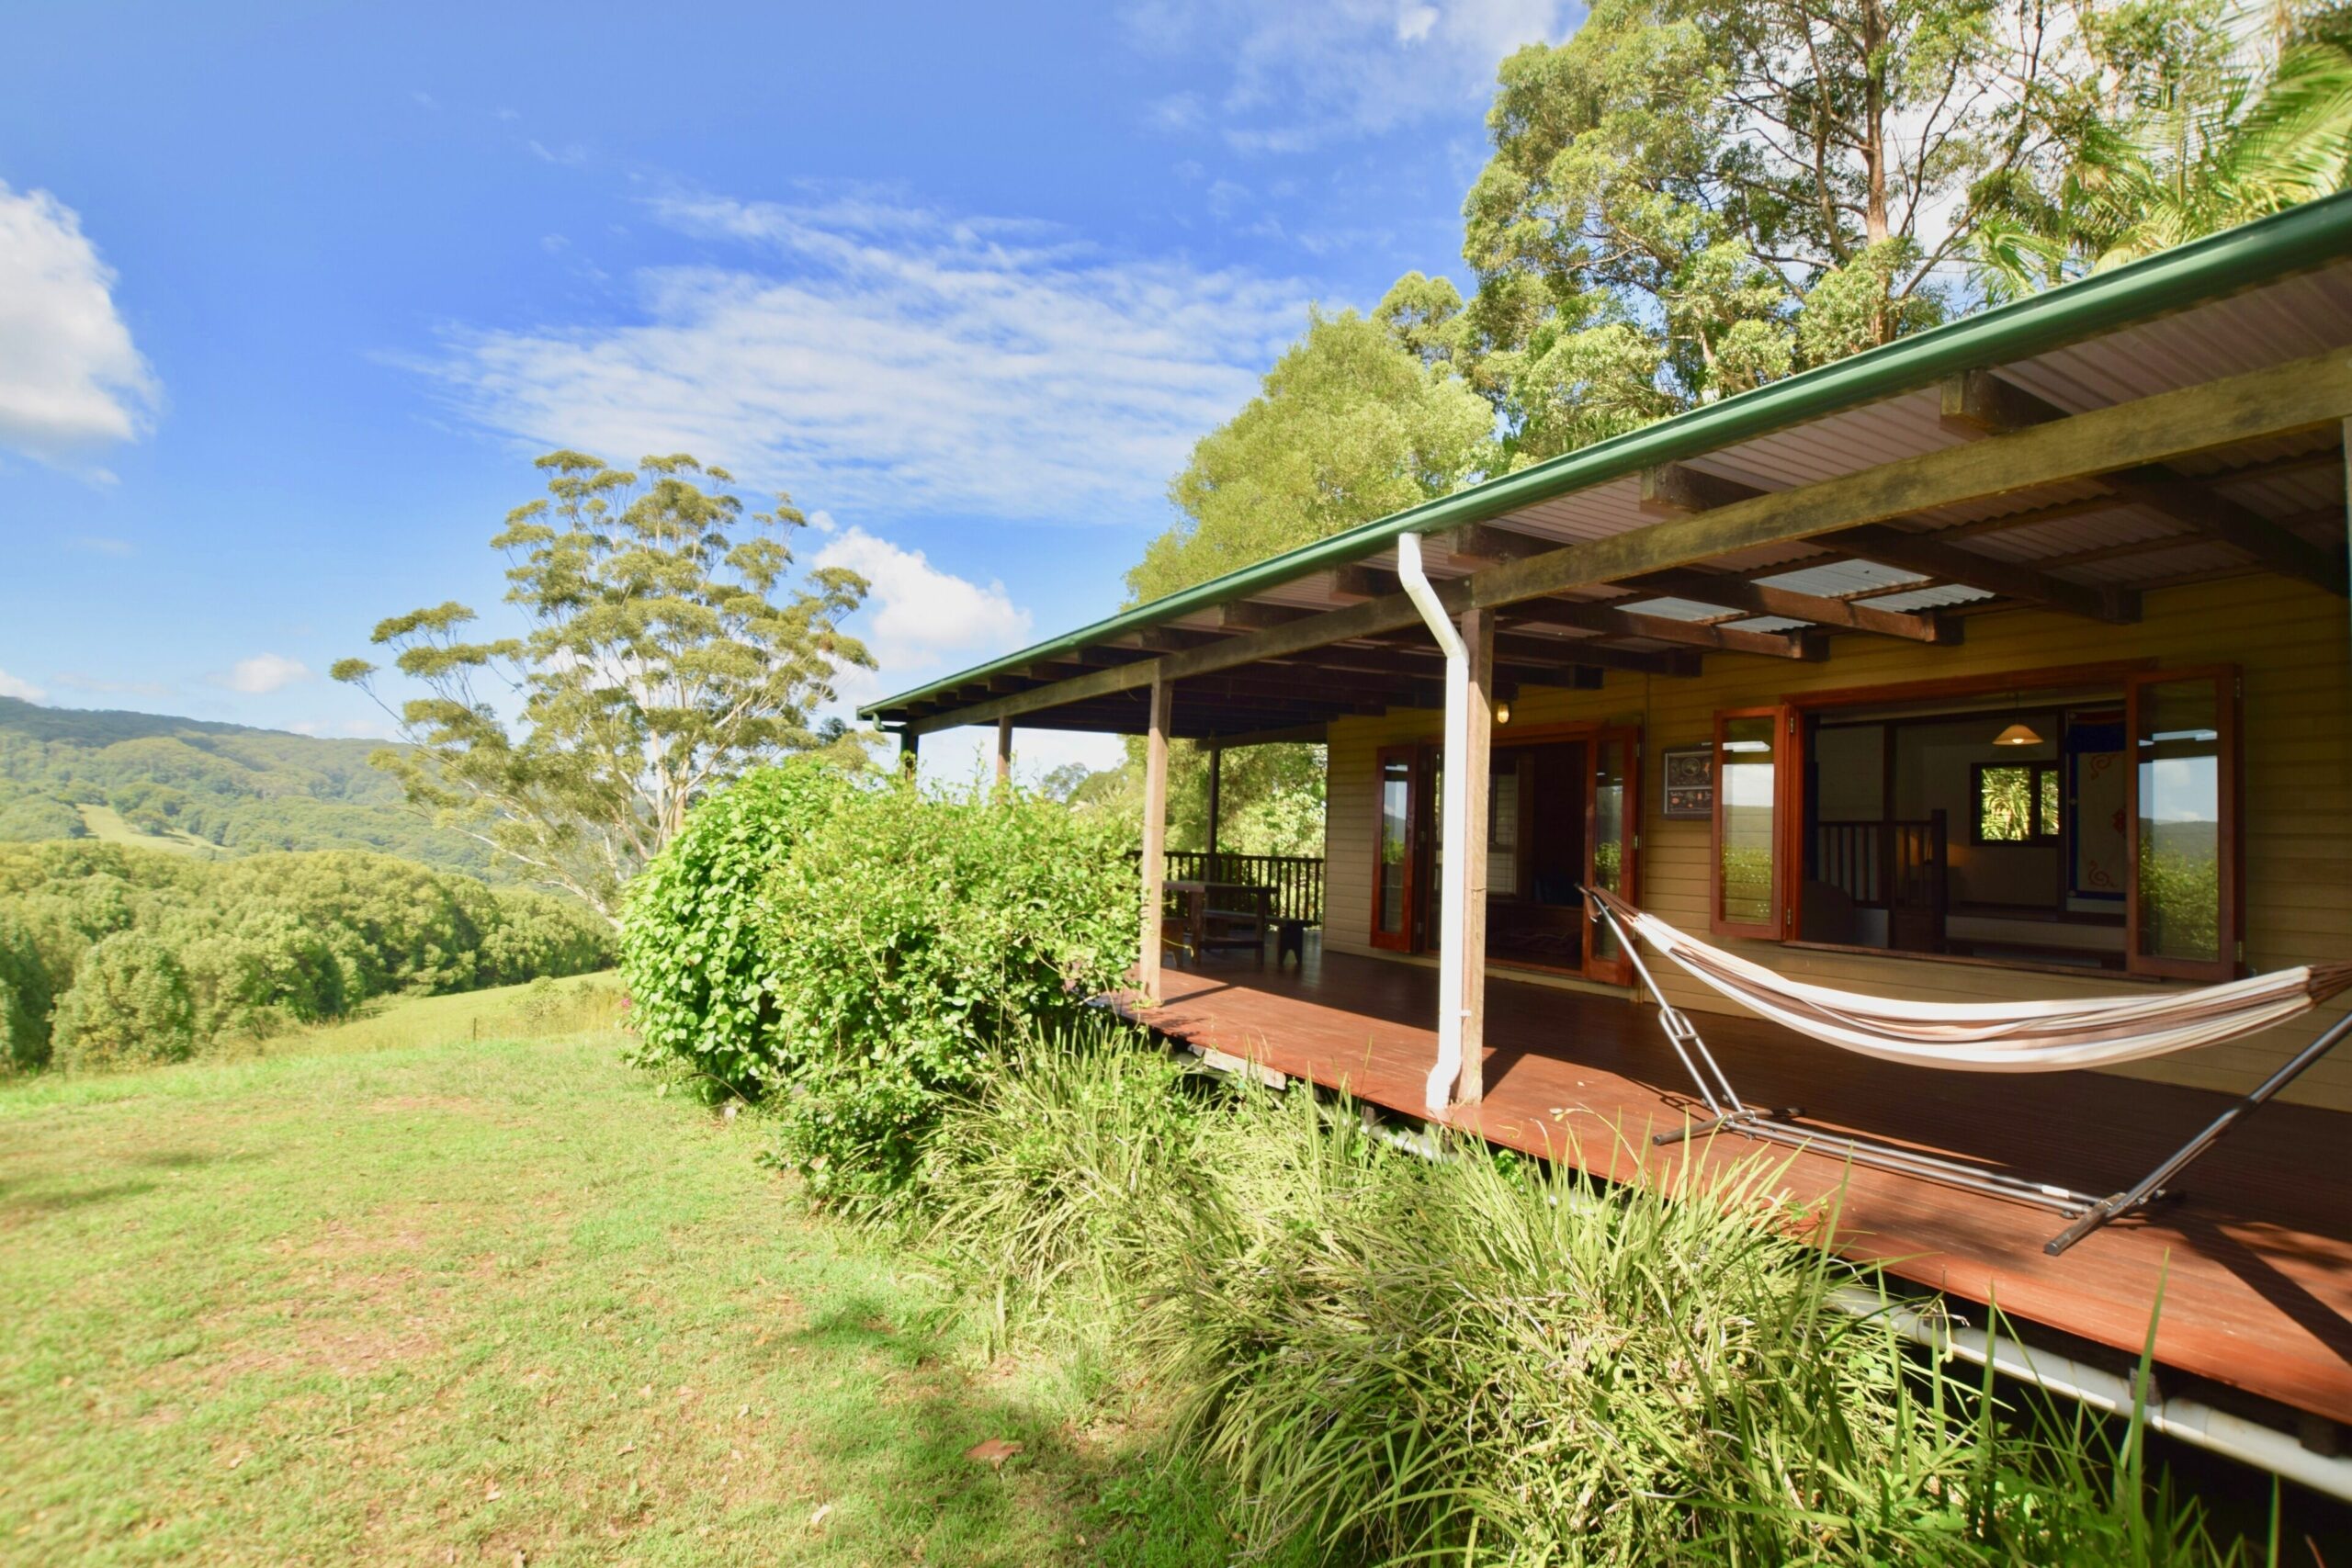 Wyndella Retreat - Converted Banana Shed With Breathtaking Views and Sunsets Plus Mod Cons